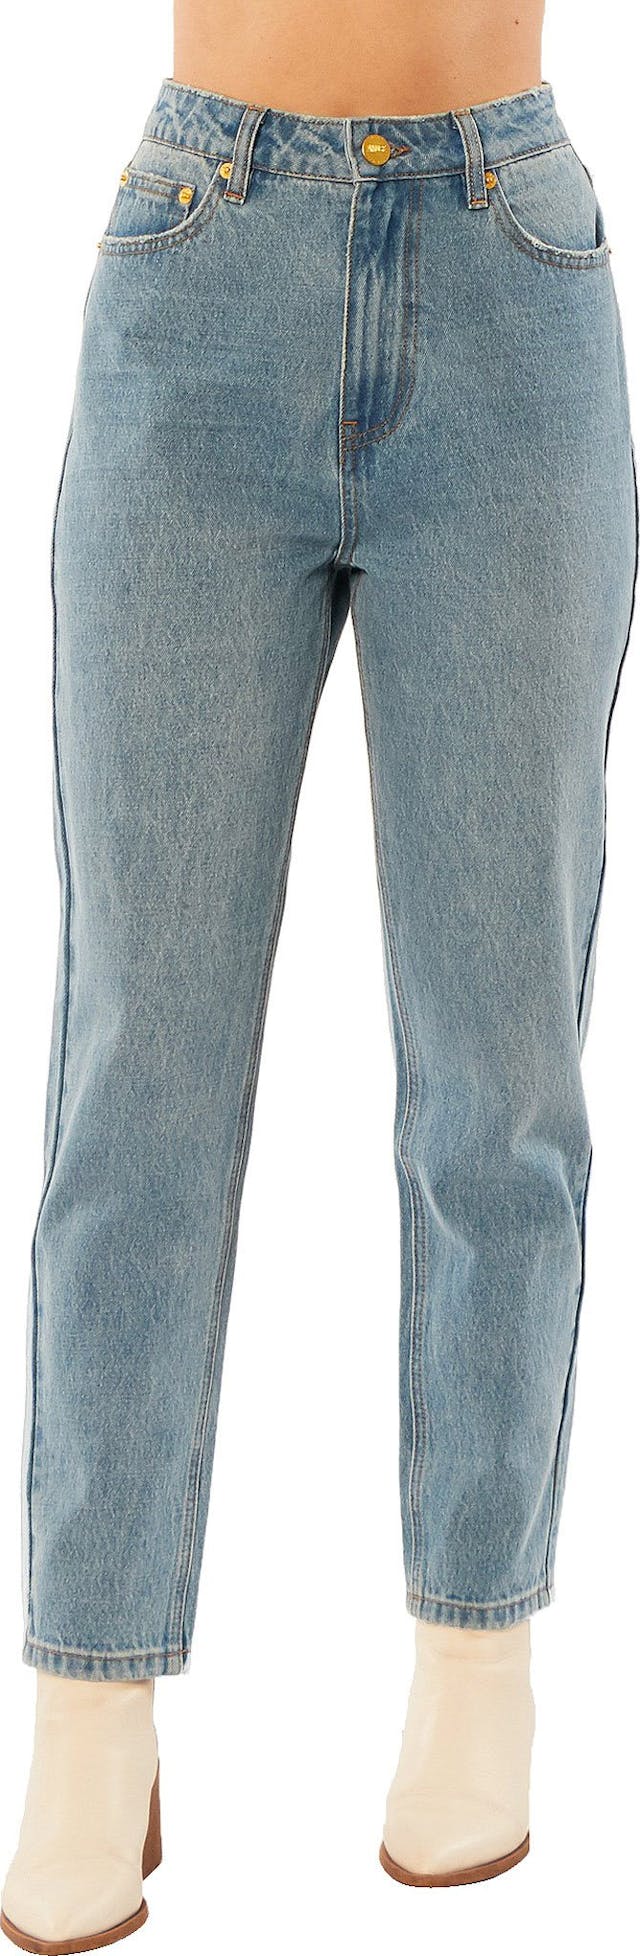 Product image for Stella Woven Denim Pant - Women's